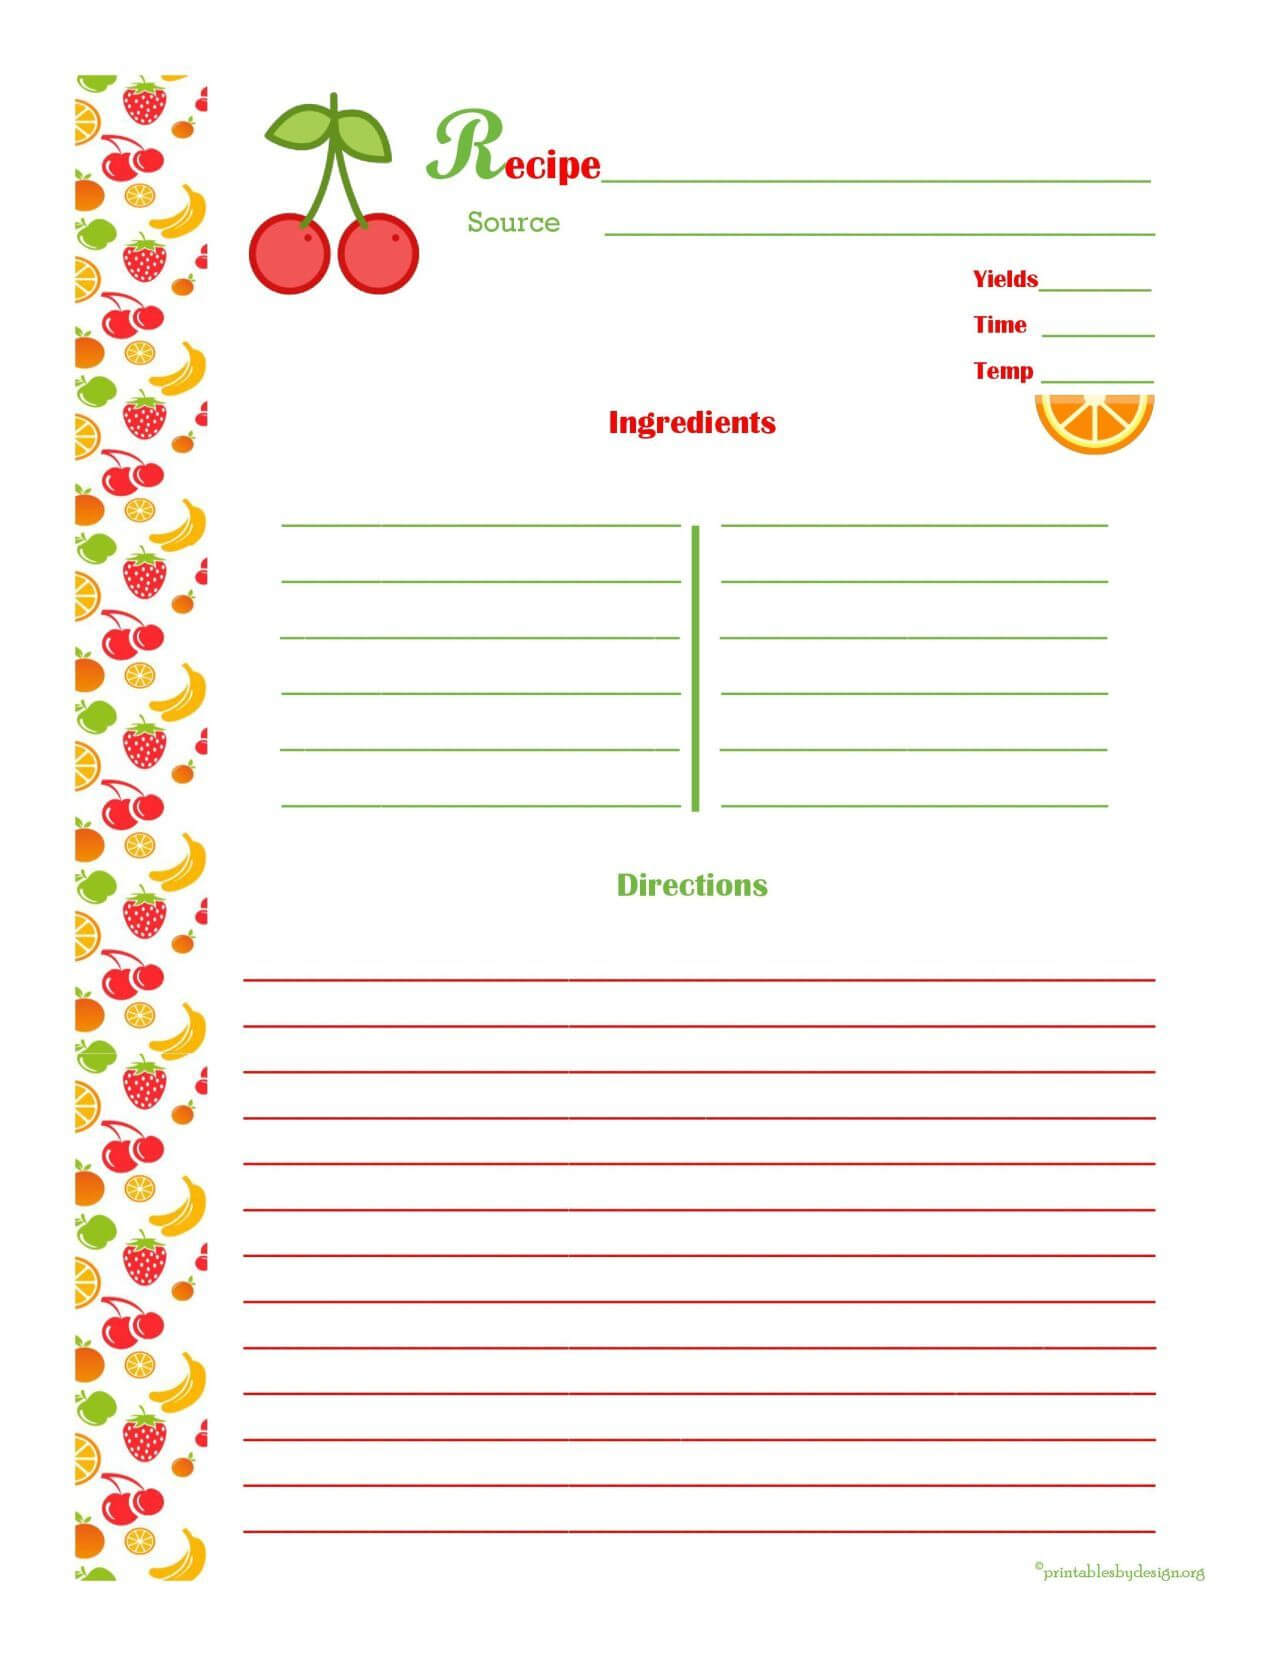 Free Editable Recipe Card Templates For Microsoft Word Pertaining To Microsoft Word Recipe Card Template